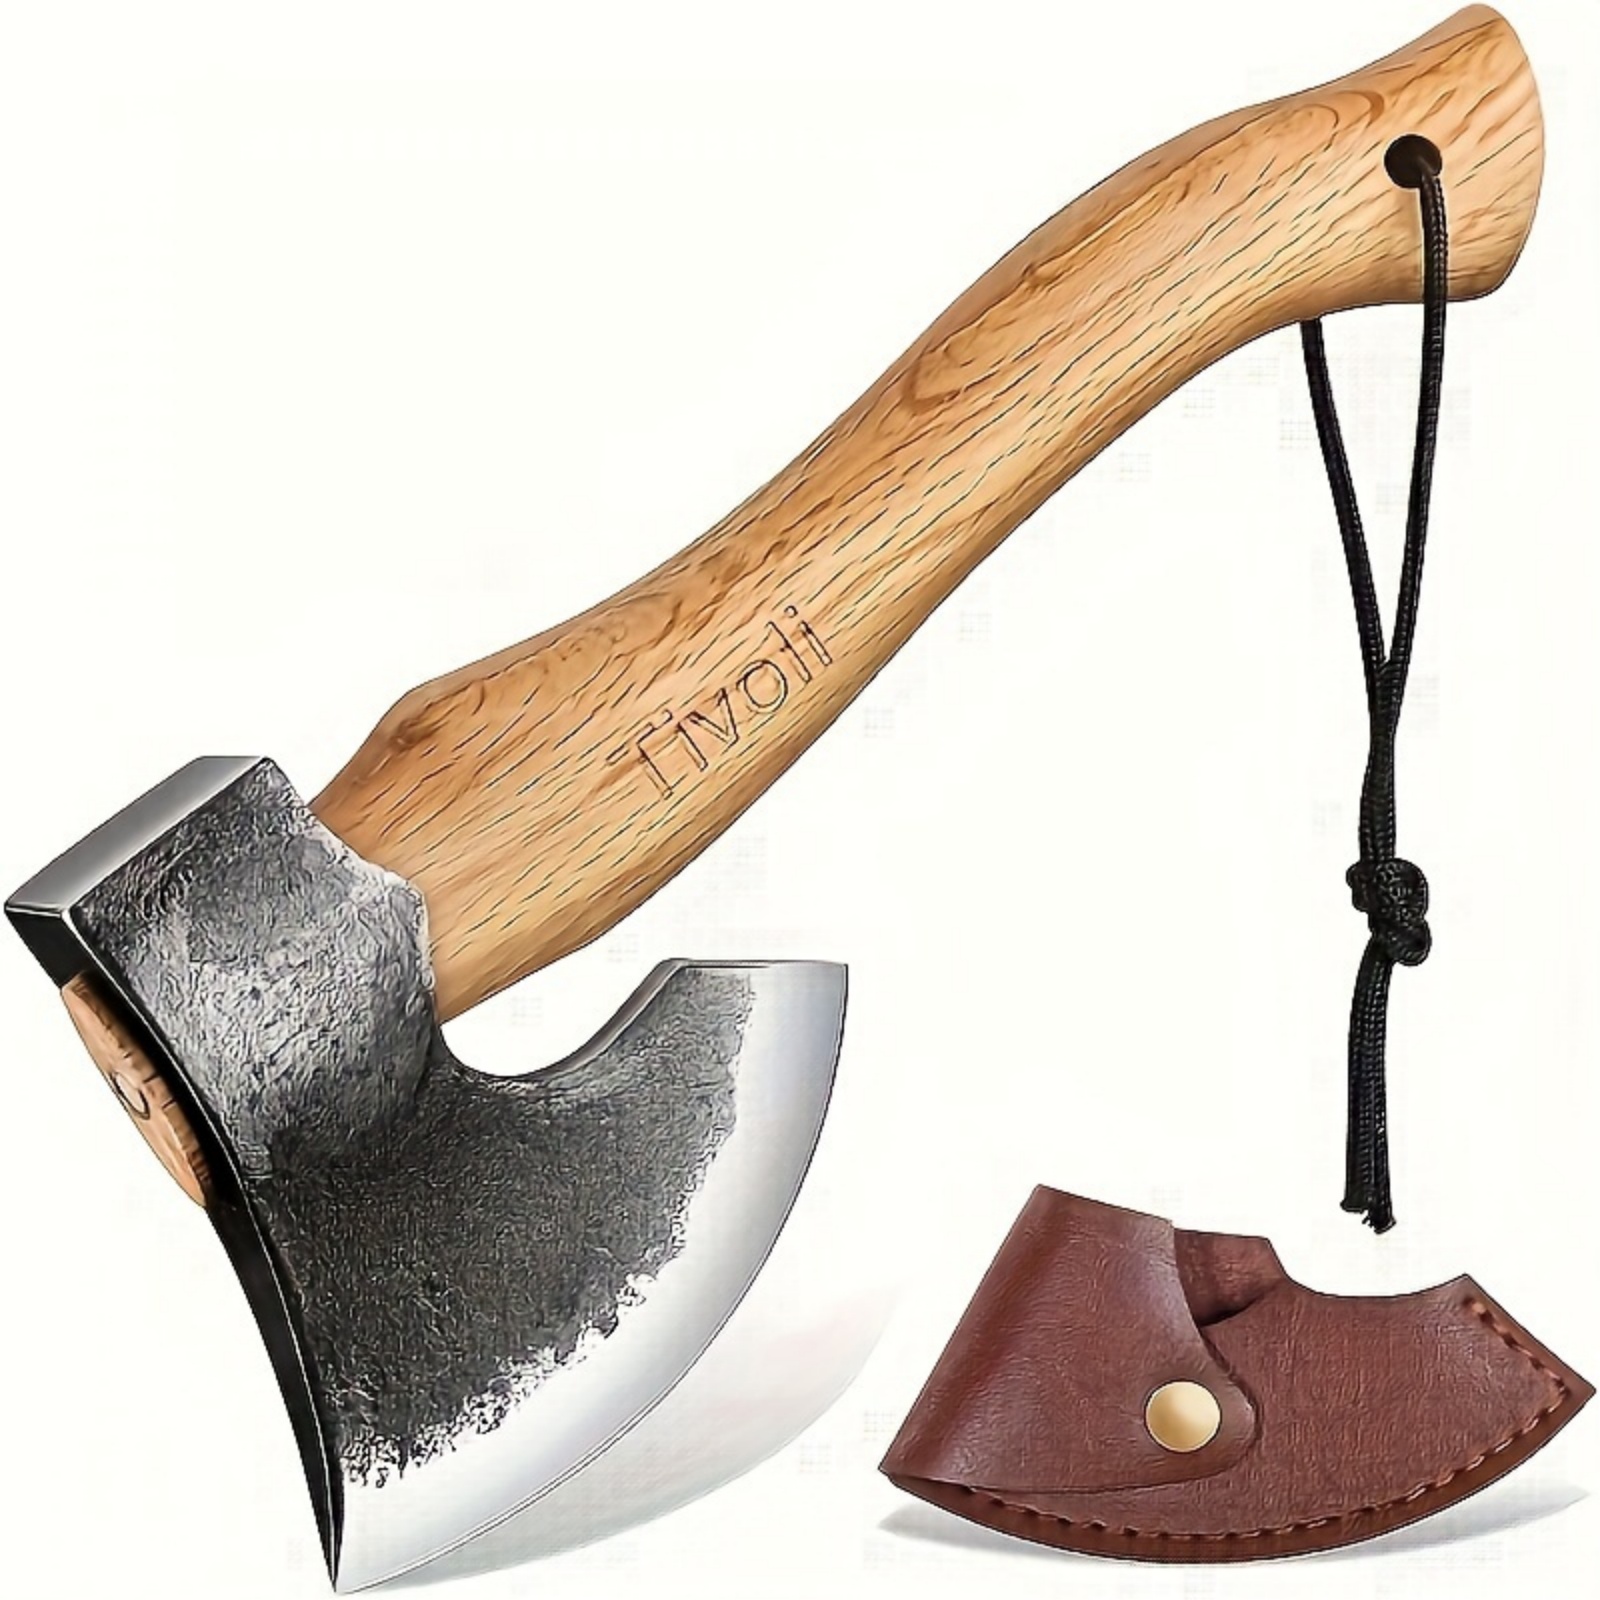 

11 Inch Hatchet Camping Axe, Small Bushcraft Axe For Chopping And Wood Splitting, Ash Wood Handle, Perfect For Outdoor Adventures, Trekking, Gardening